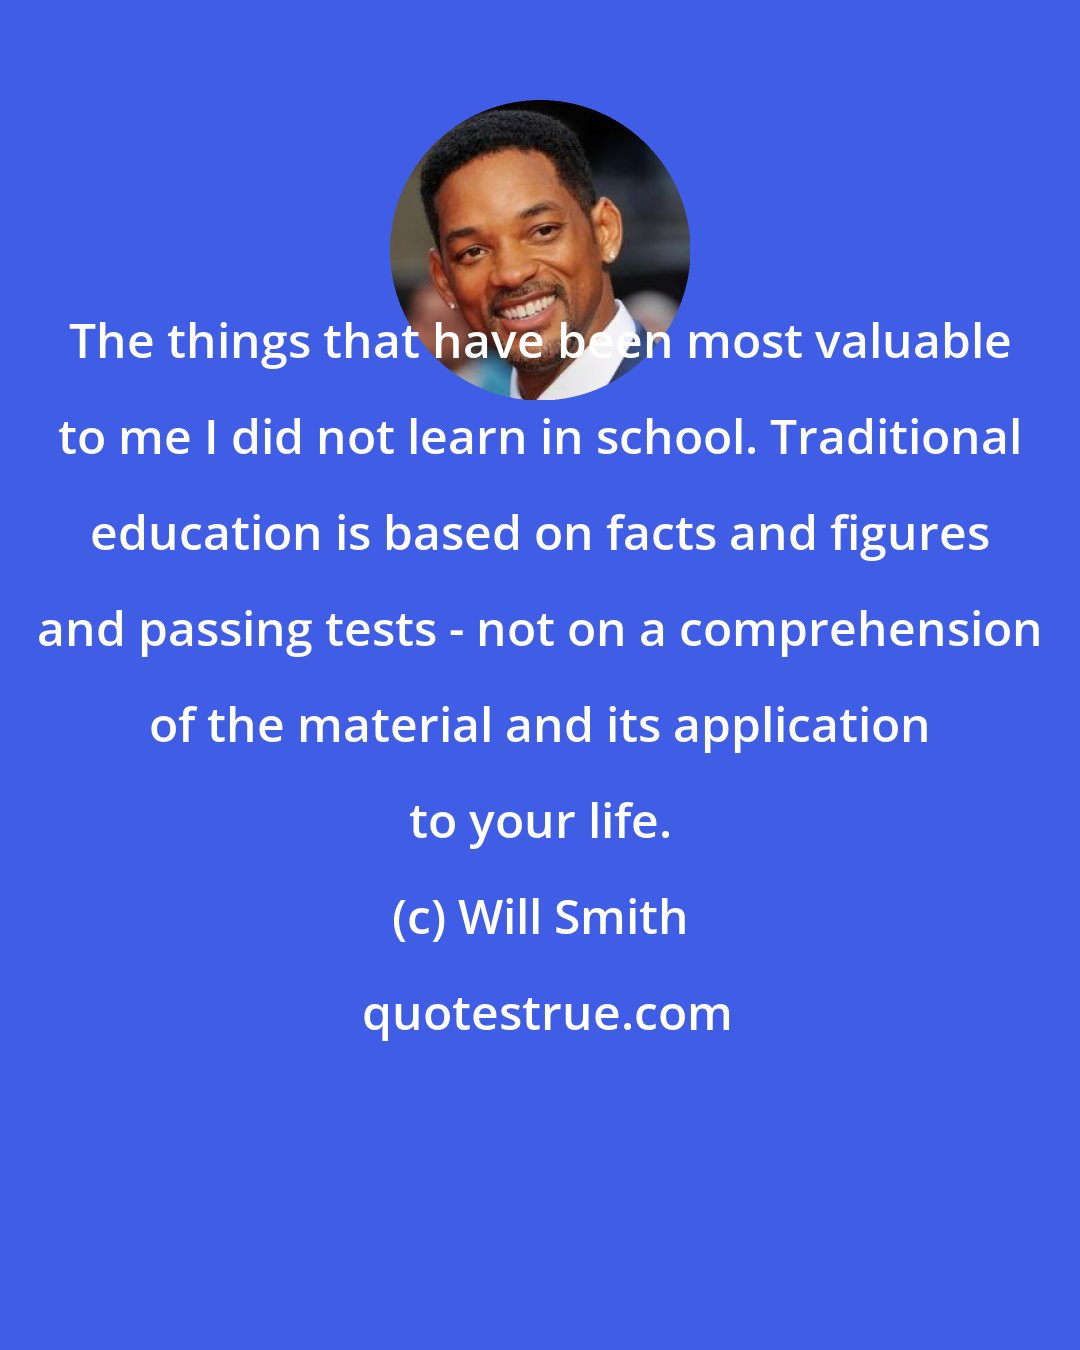 Will Smith: The things that have been most valuable to me I did not learn in school. Traditional education is based on facts and figures and passing tests - not on a comprehension of the material and its application to your life.